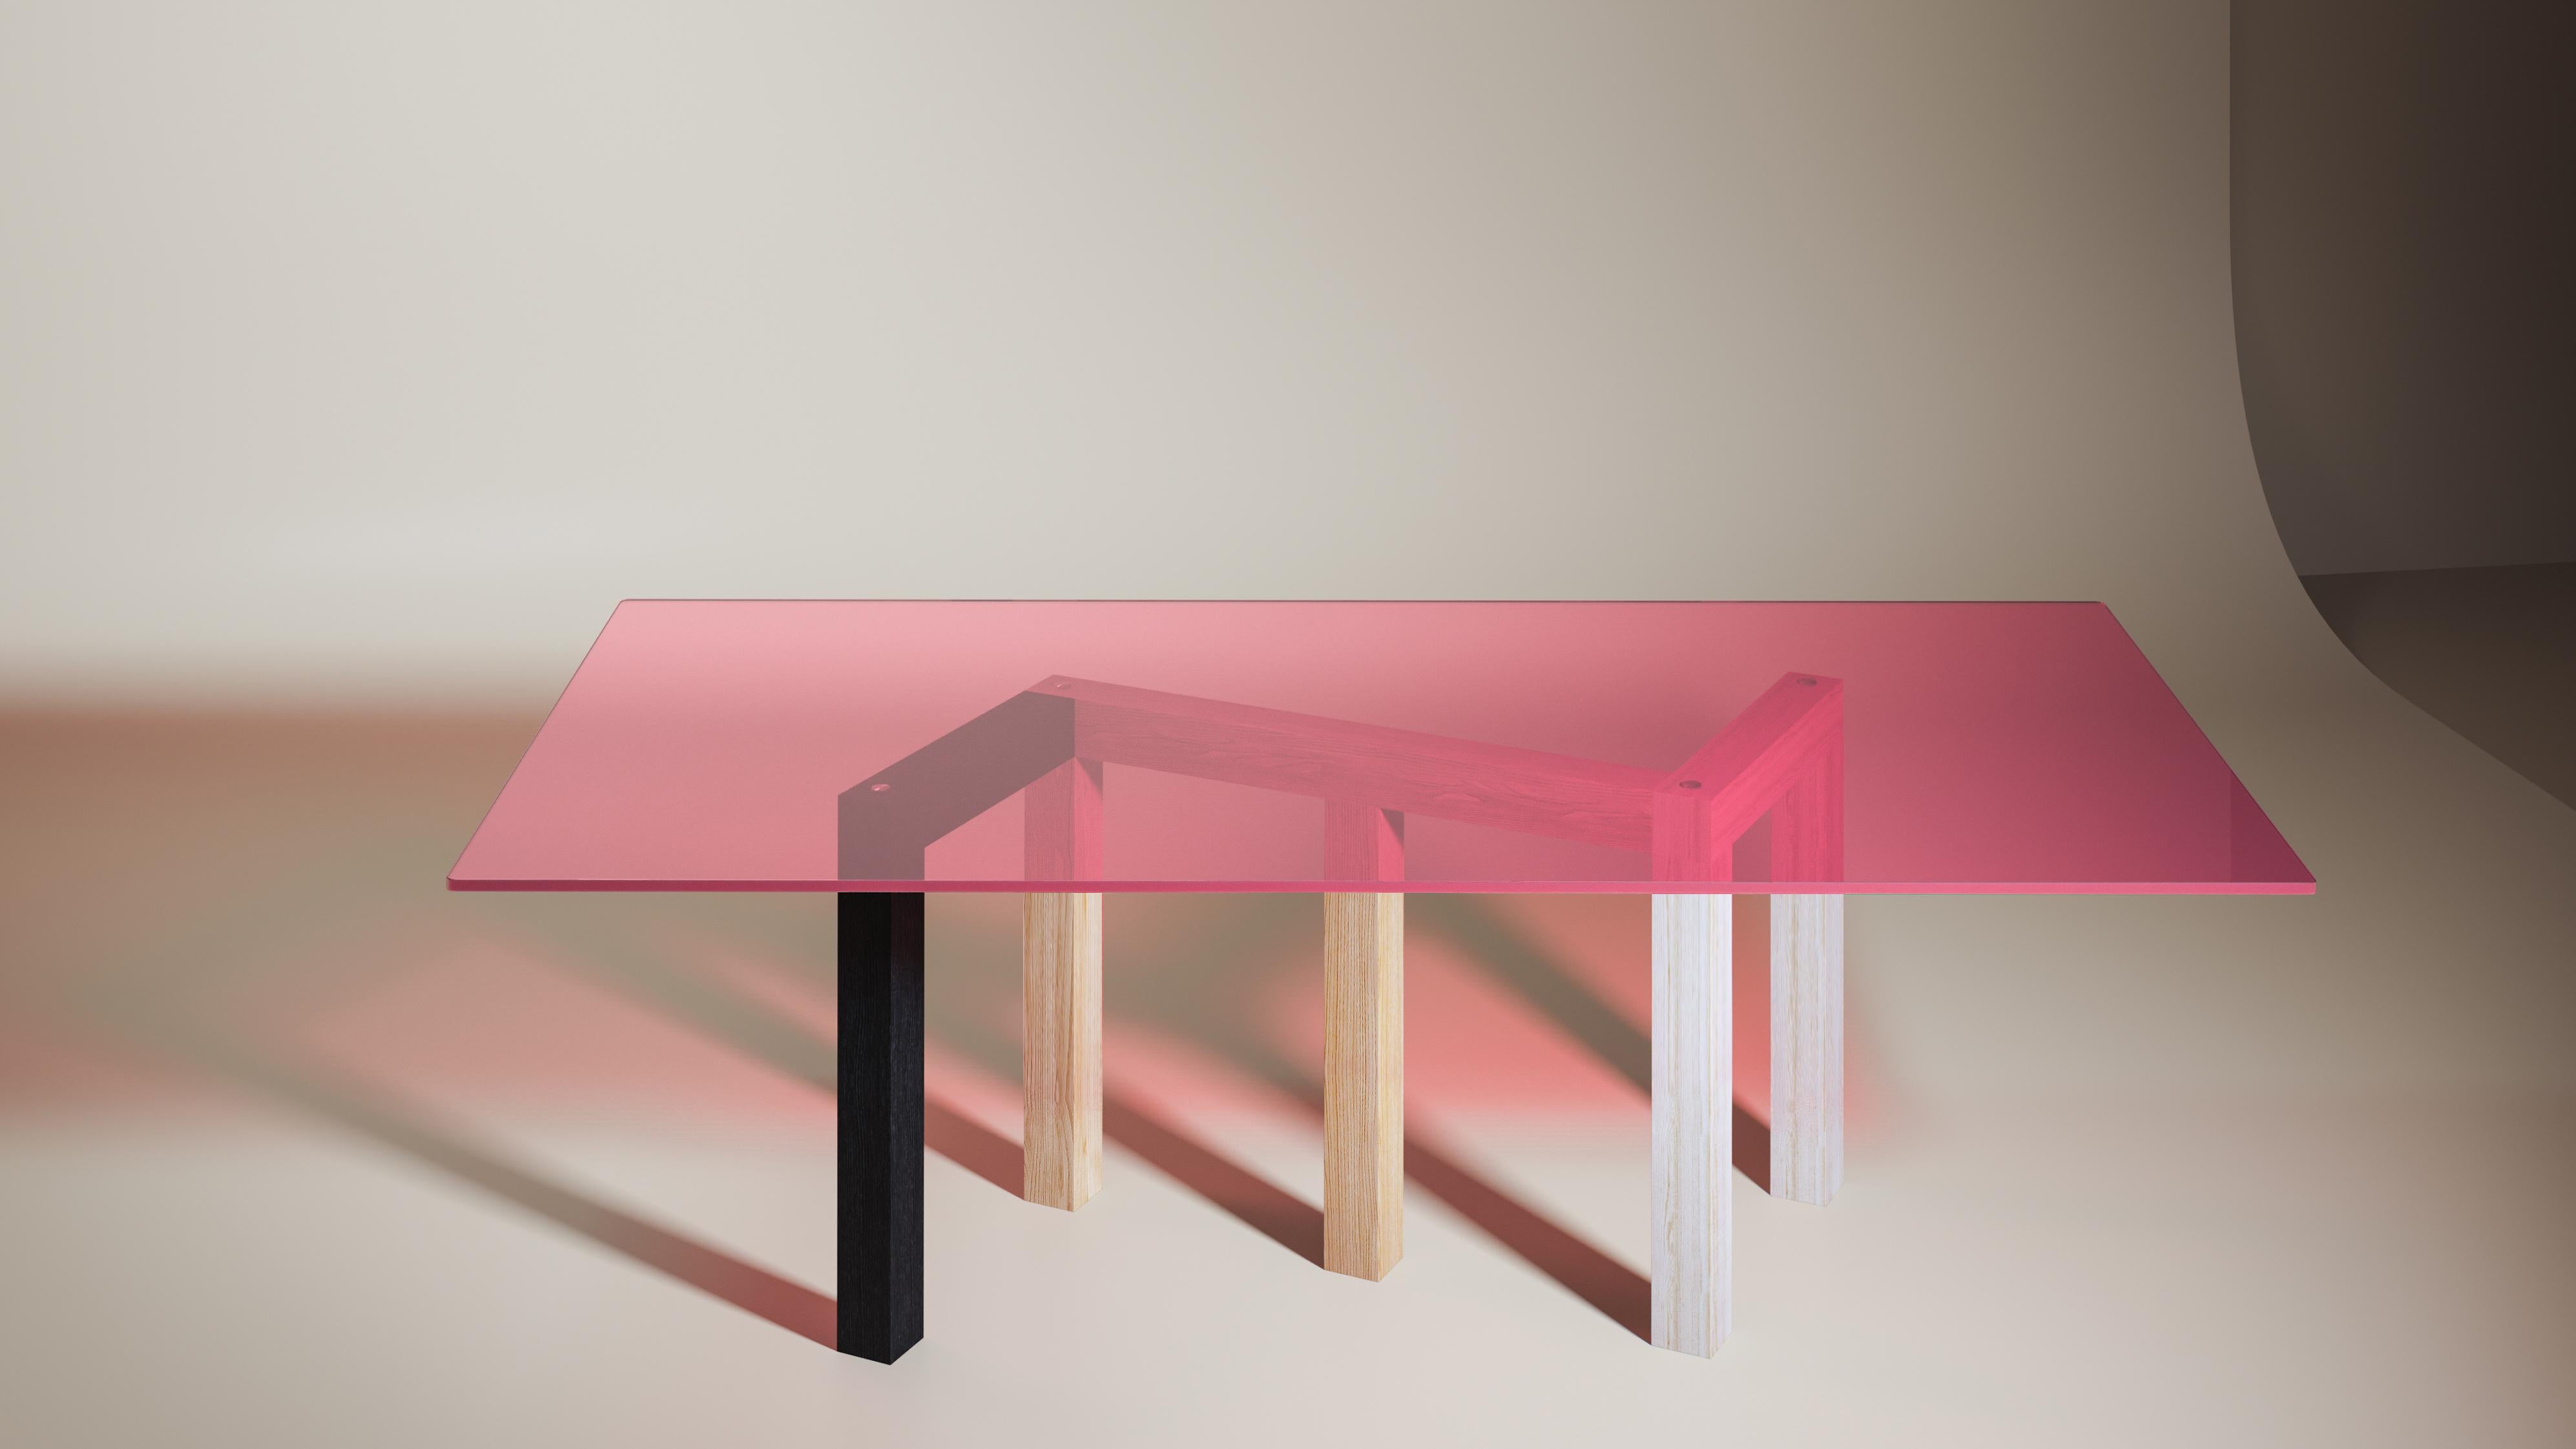 Penrose is a large dinner table in wood and glass. The design was inspired by the geometric research of mathematician Roger Penrose and his famous impossible triangle.
Depending on the point of view, the legs overlap or blend to form shapes with 3,